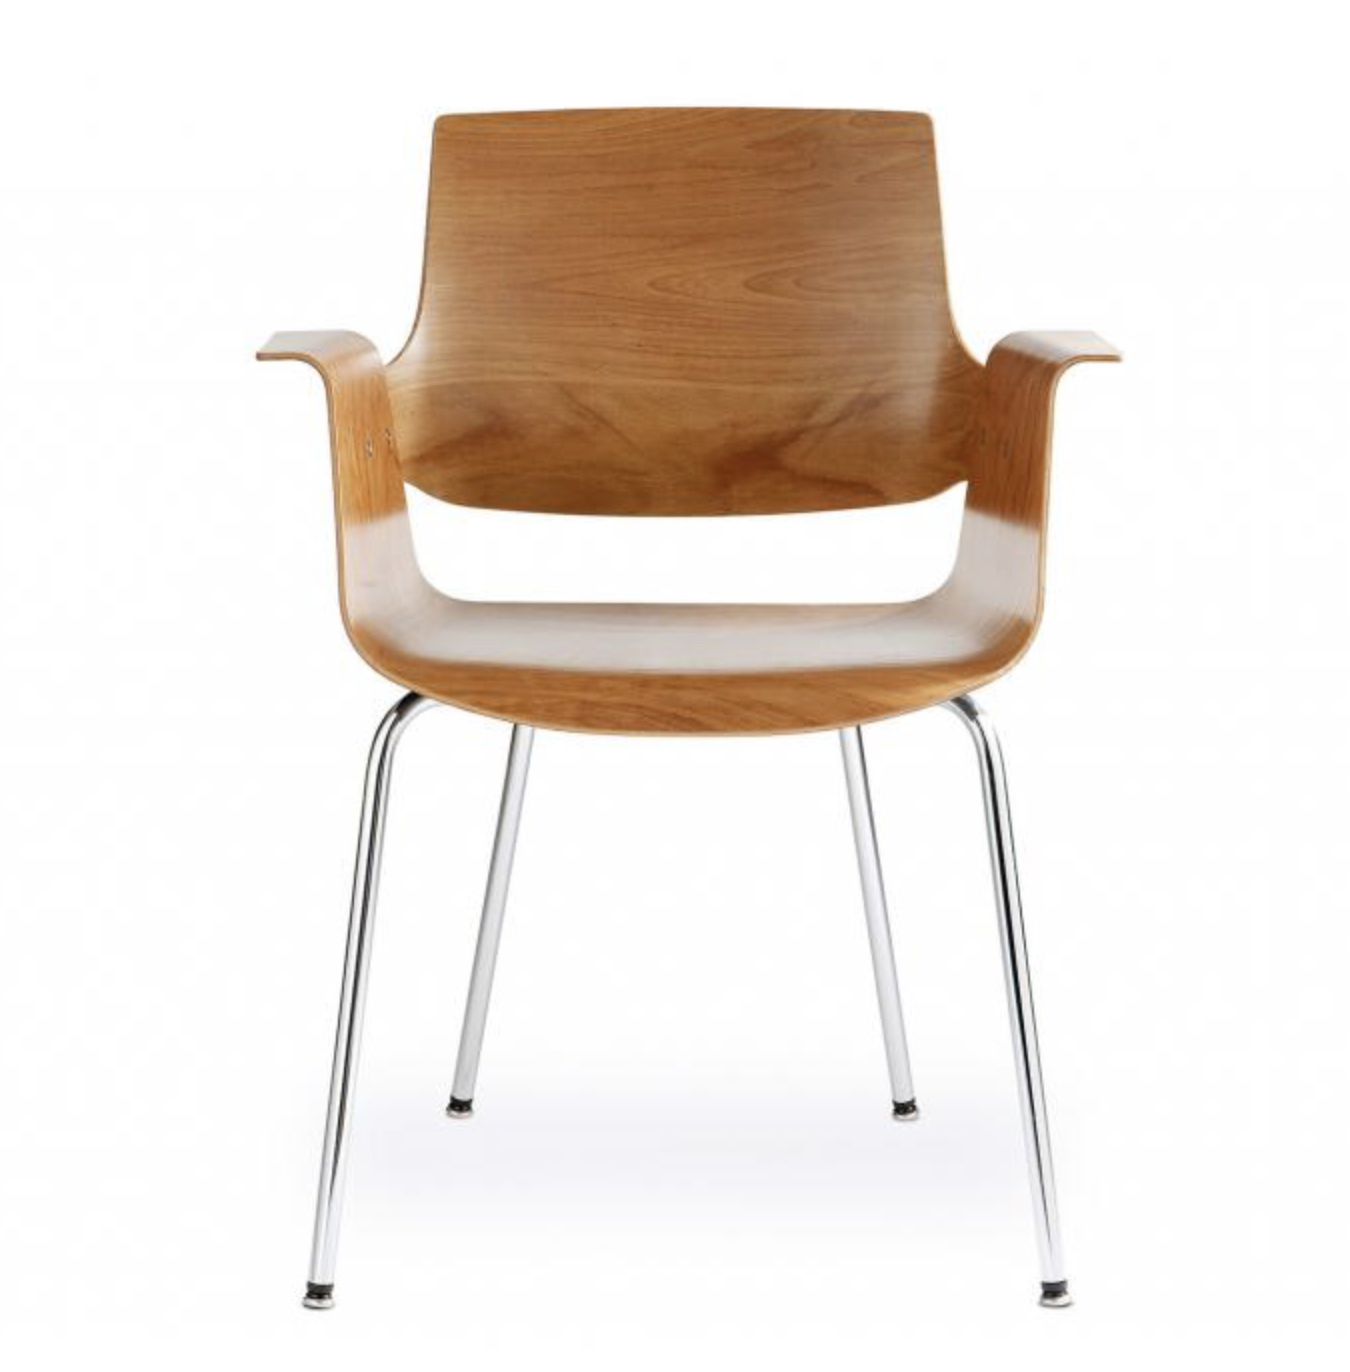 Marchand-chair 4060 by embru